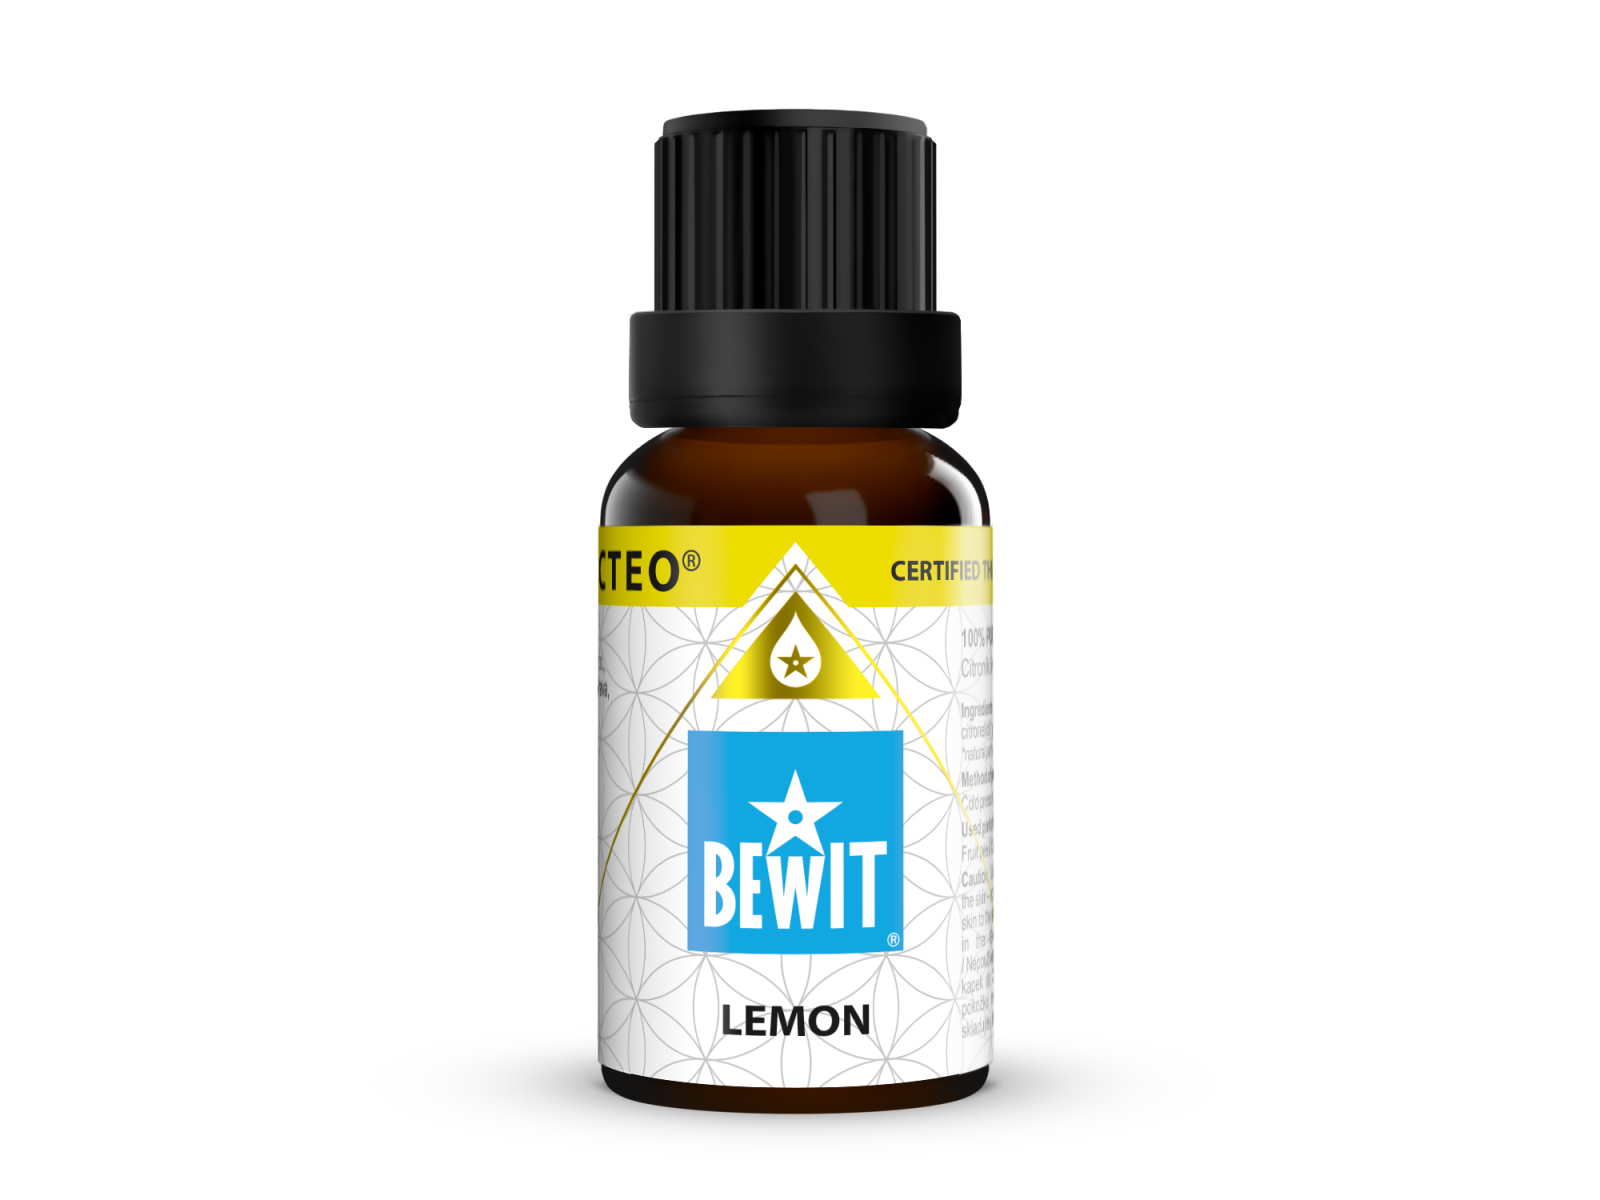 BEWIT Lemon - 100% pure and natural CTEO® essential oil - 2